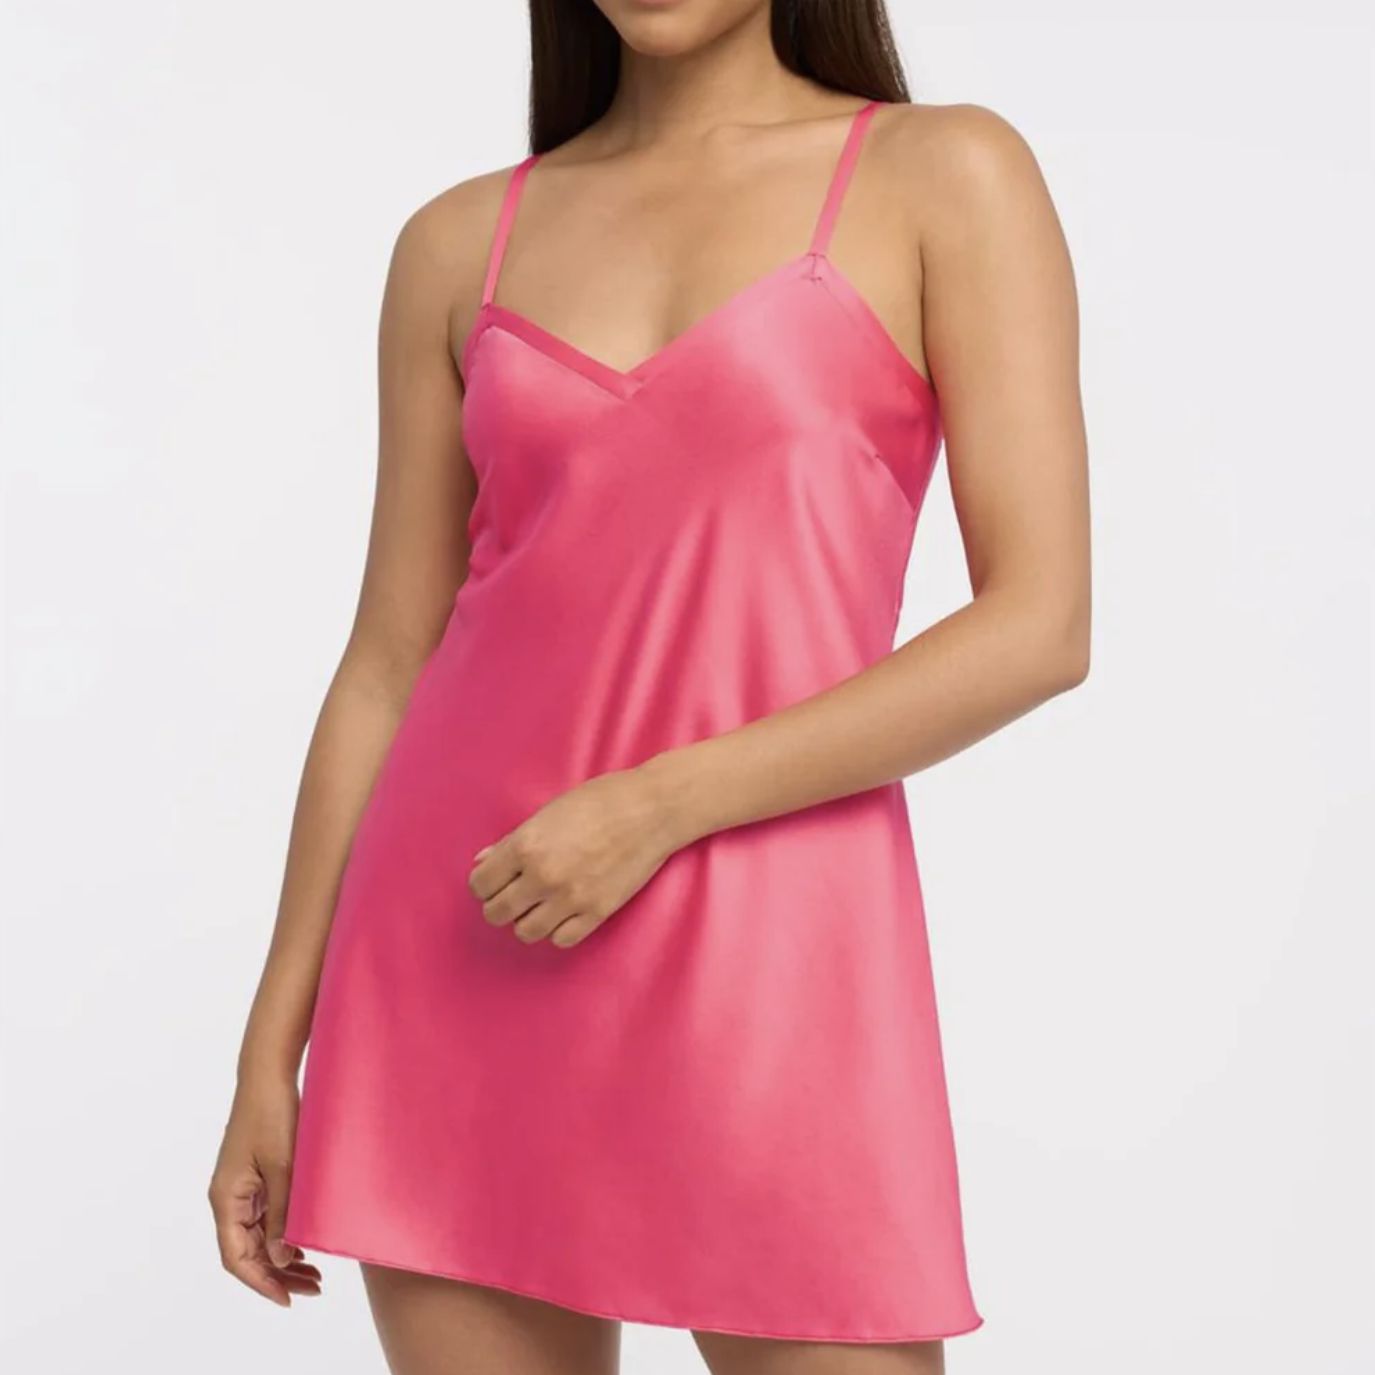 Rya Collection Fresh Chemise in Azalea 195-Loungewear-Rya Collection-Azalea-XSmall-Anna Bella Fine Lingerie, Reveal Your Most Gorgeous Self!